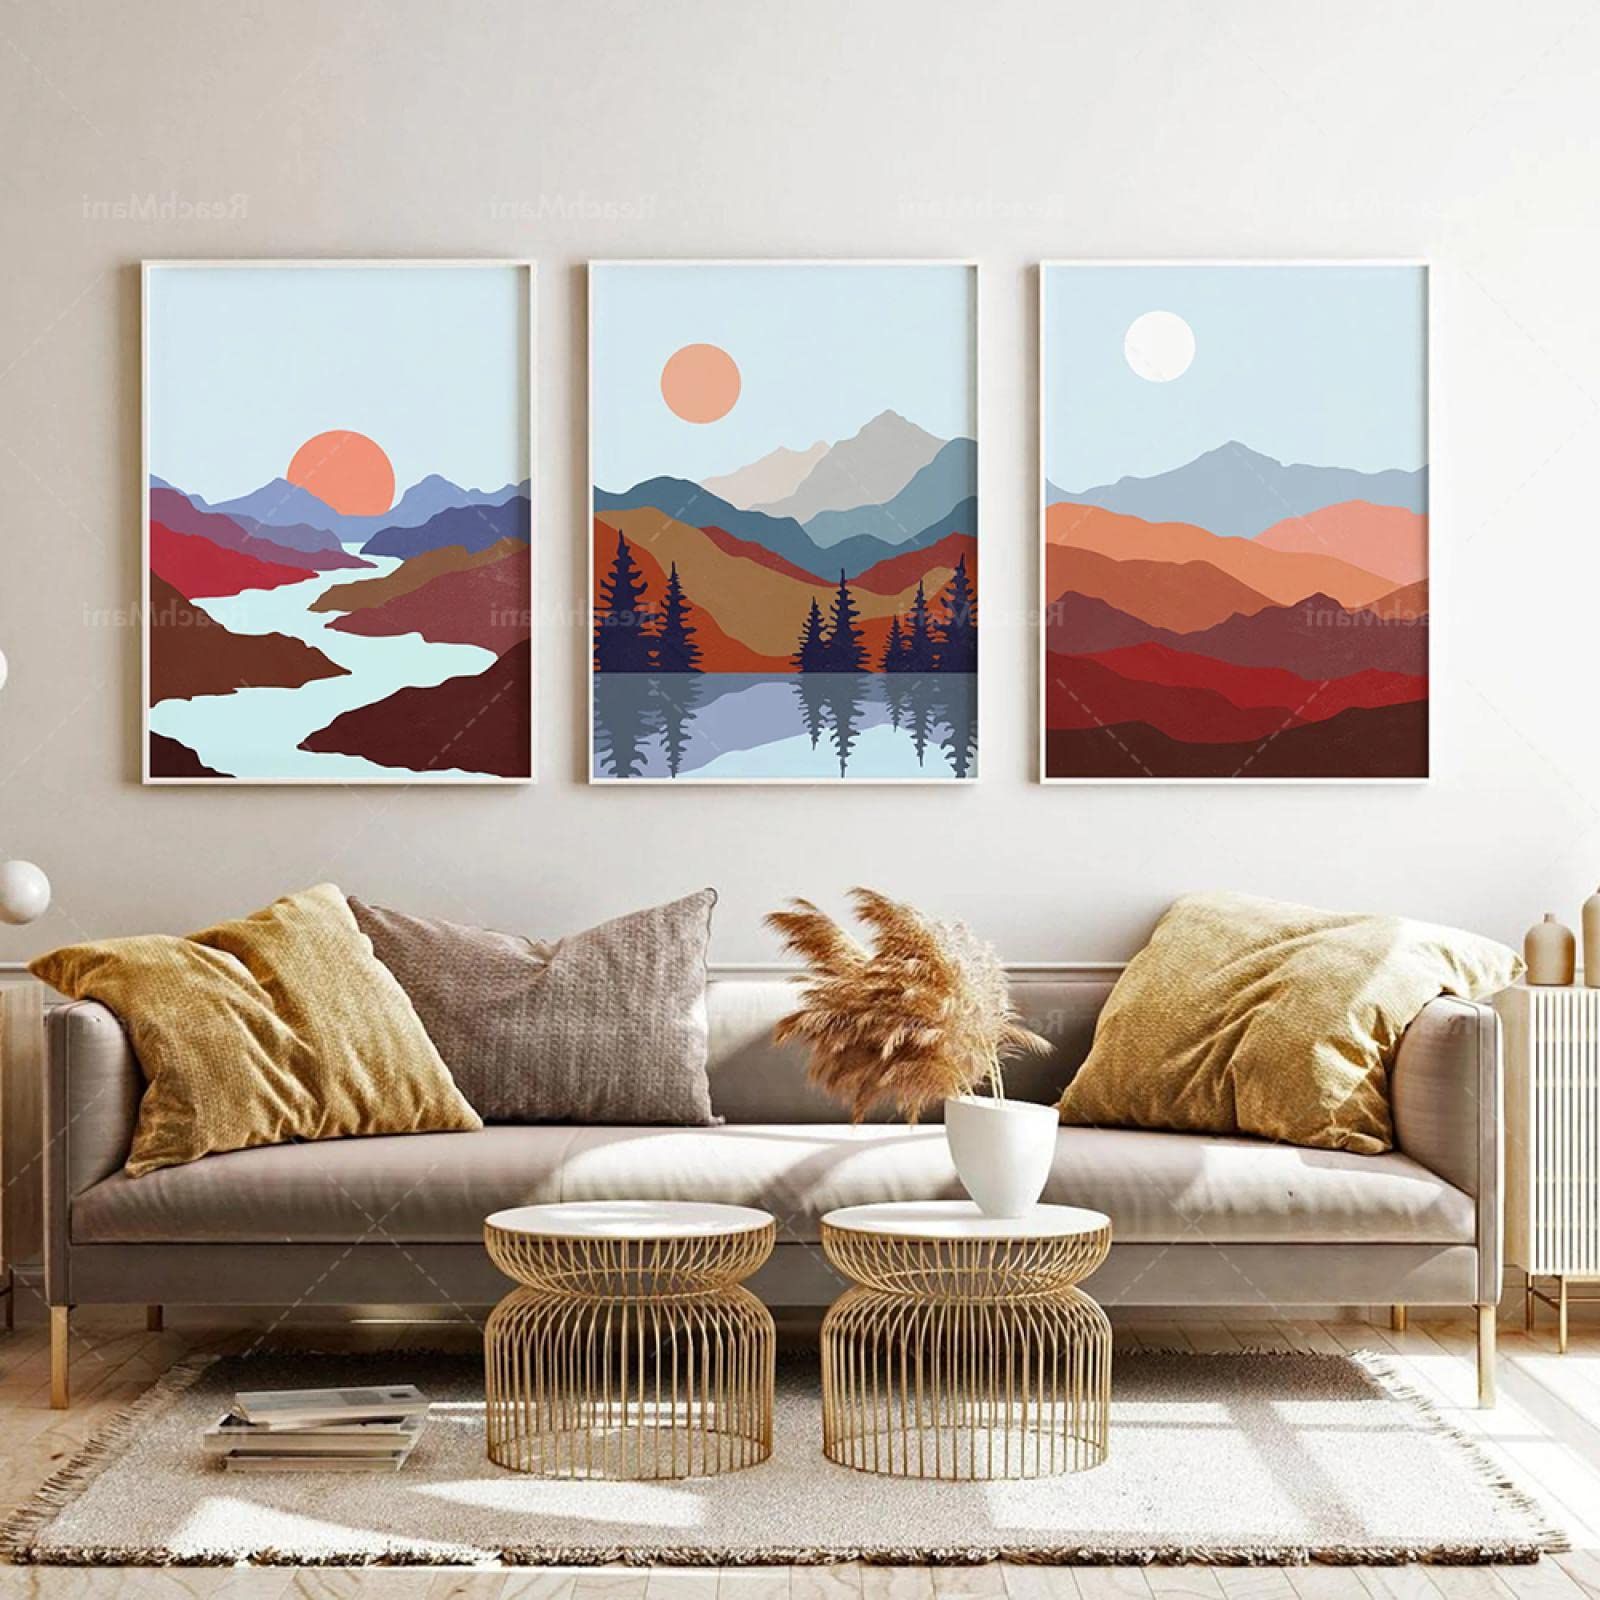 Abstract Terracotta Landscape Wall Art Inside Most Recent Amazon: Abstract Landscape Printable Wall Art, 3 Piece Set Of Mountain  And Lake Prints, Mid Century Modern Art, Blue Rust Terracotta Pri 50*70cmx3  Frameless : Everything Else (View 6 of 15)